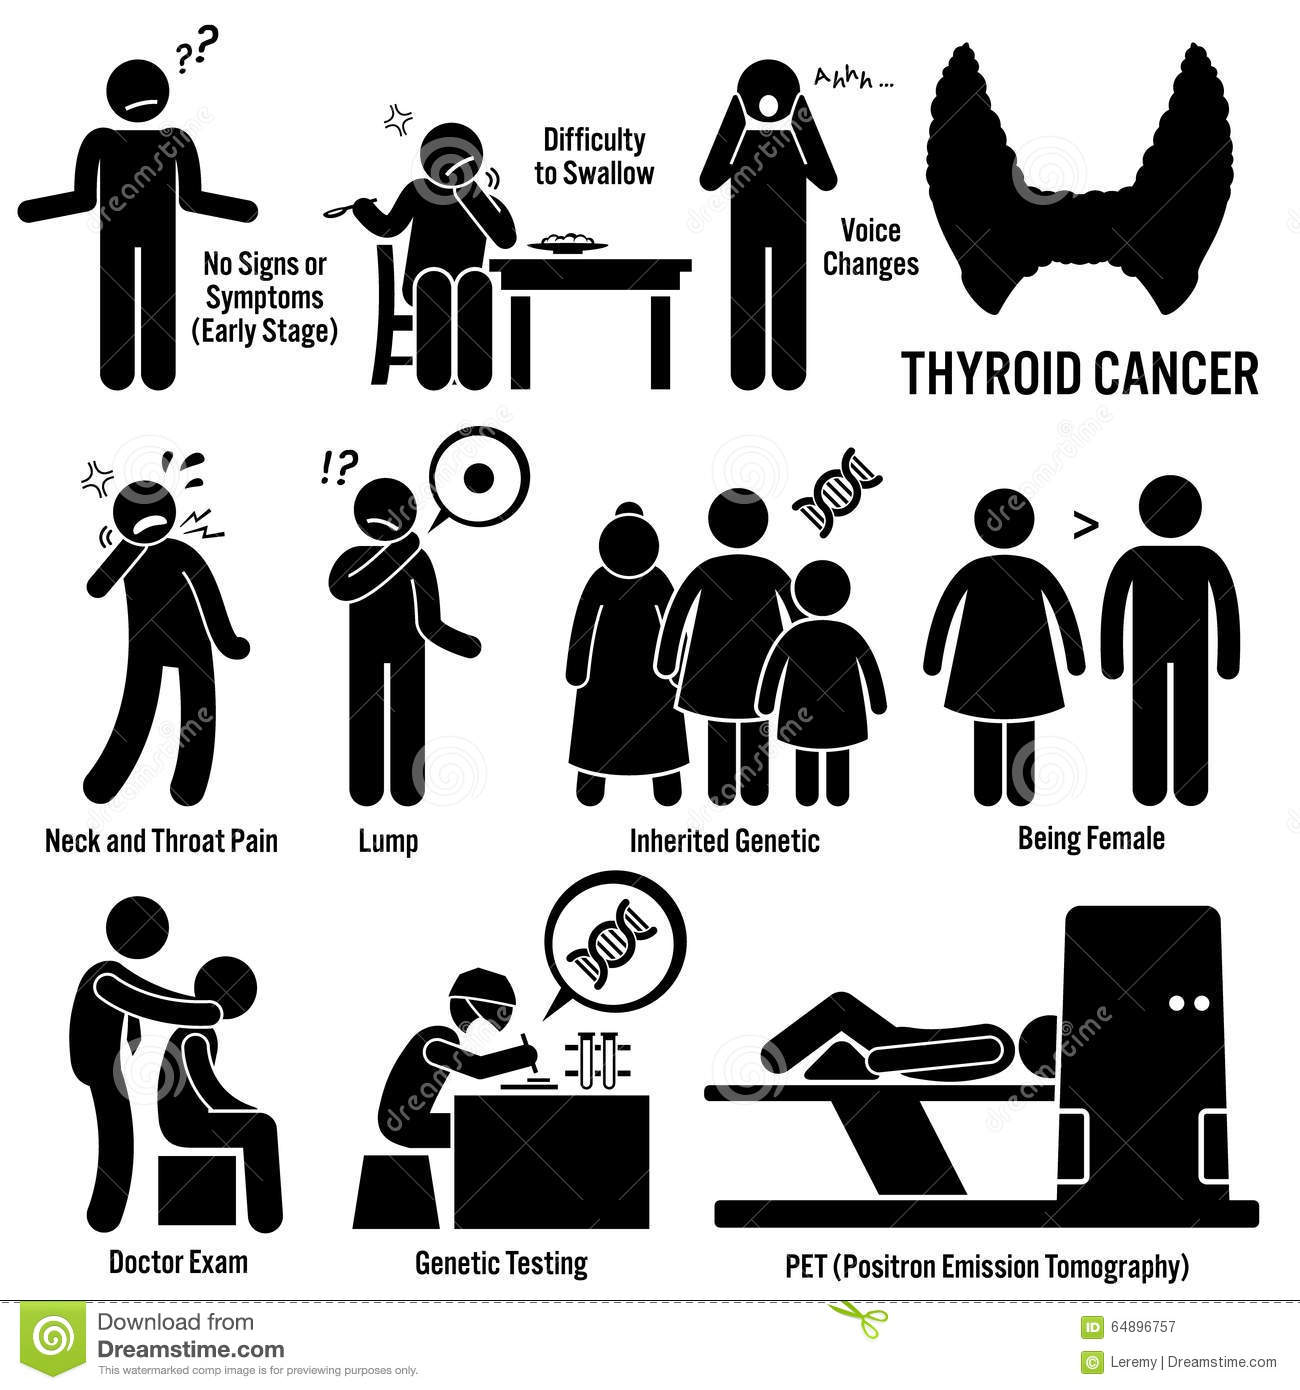 Thyroid Cancer Clipart stock vector. Illustration of difficulty